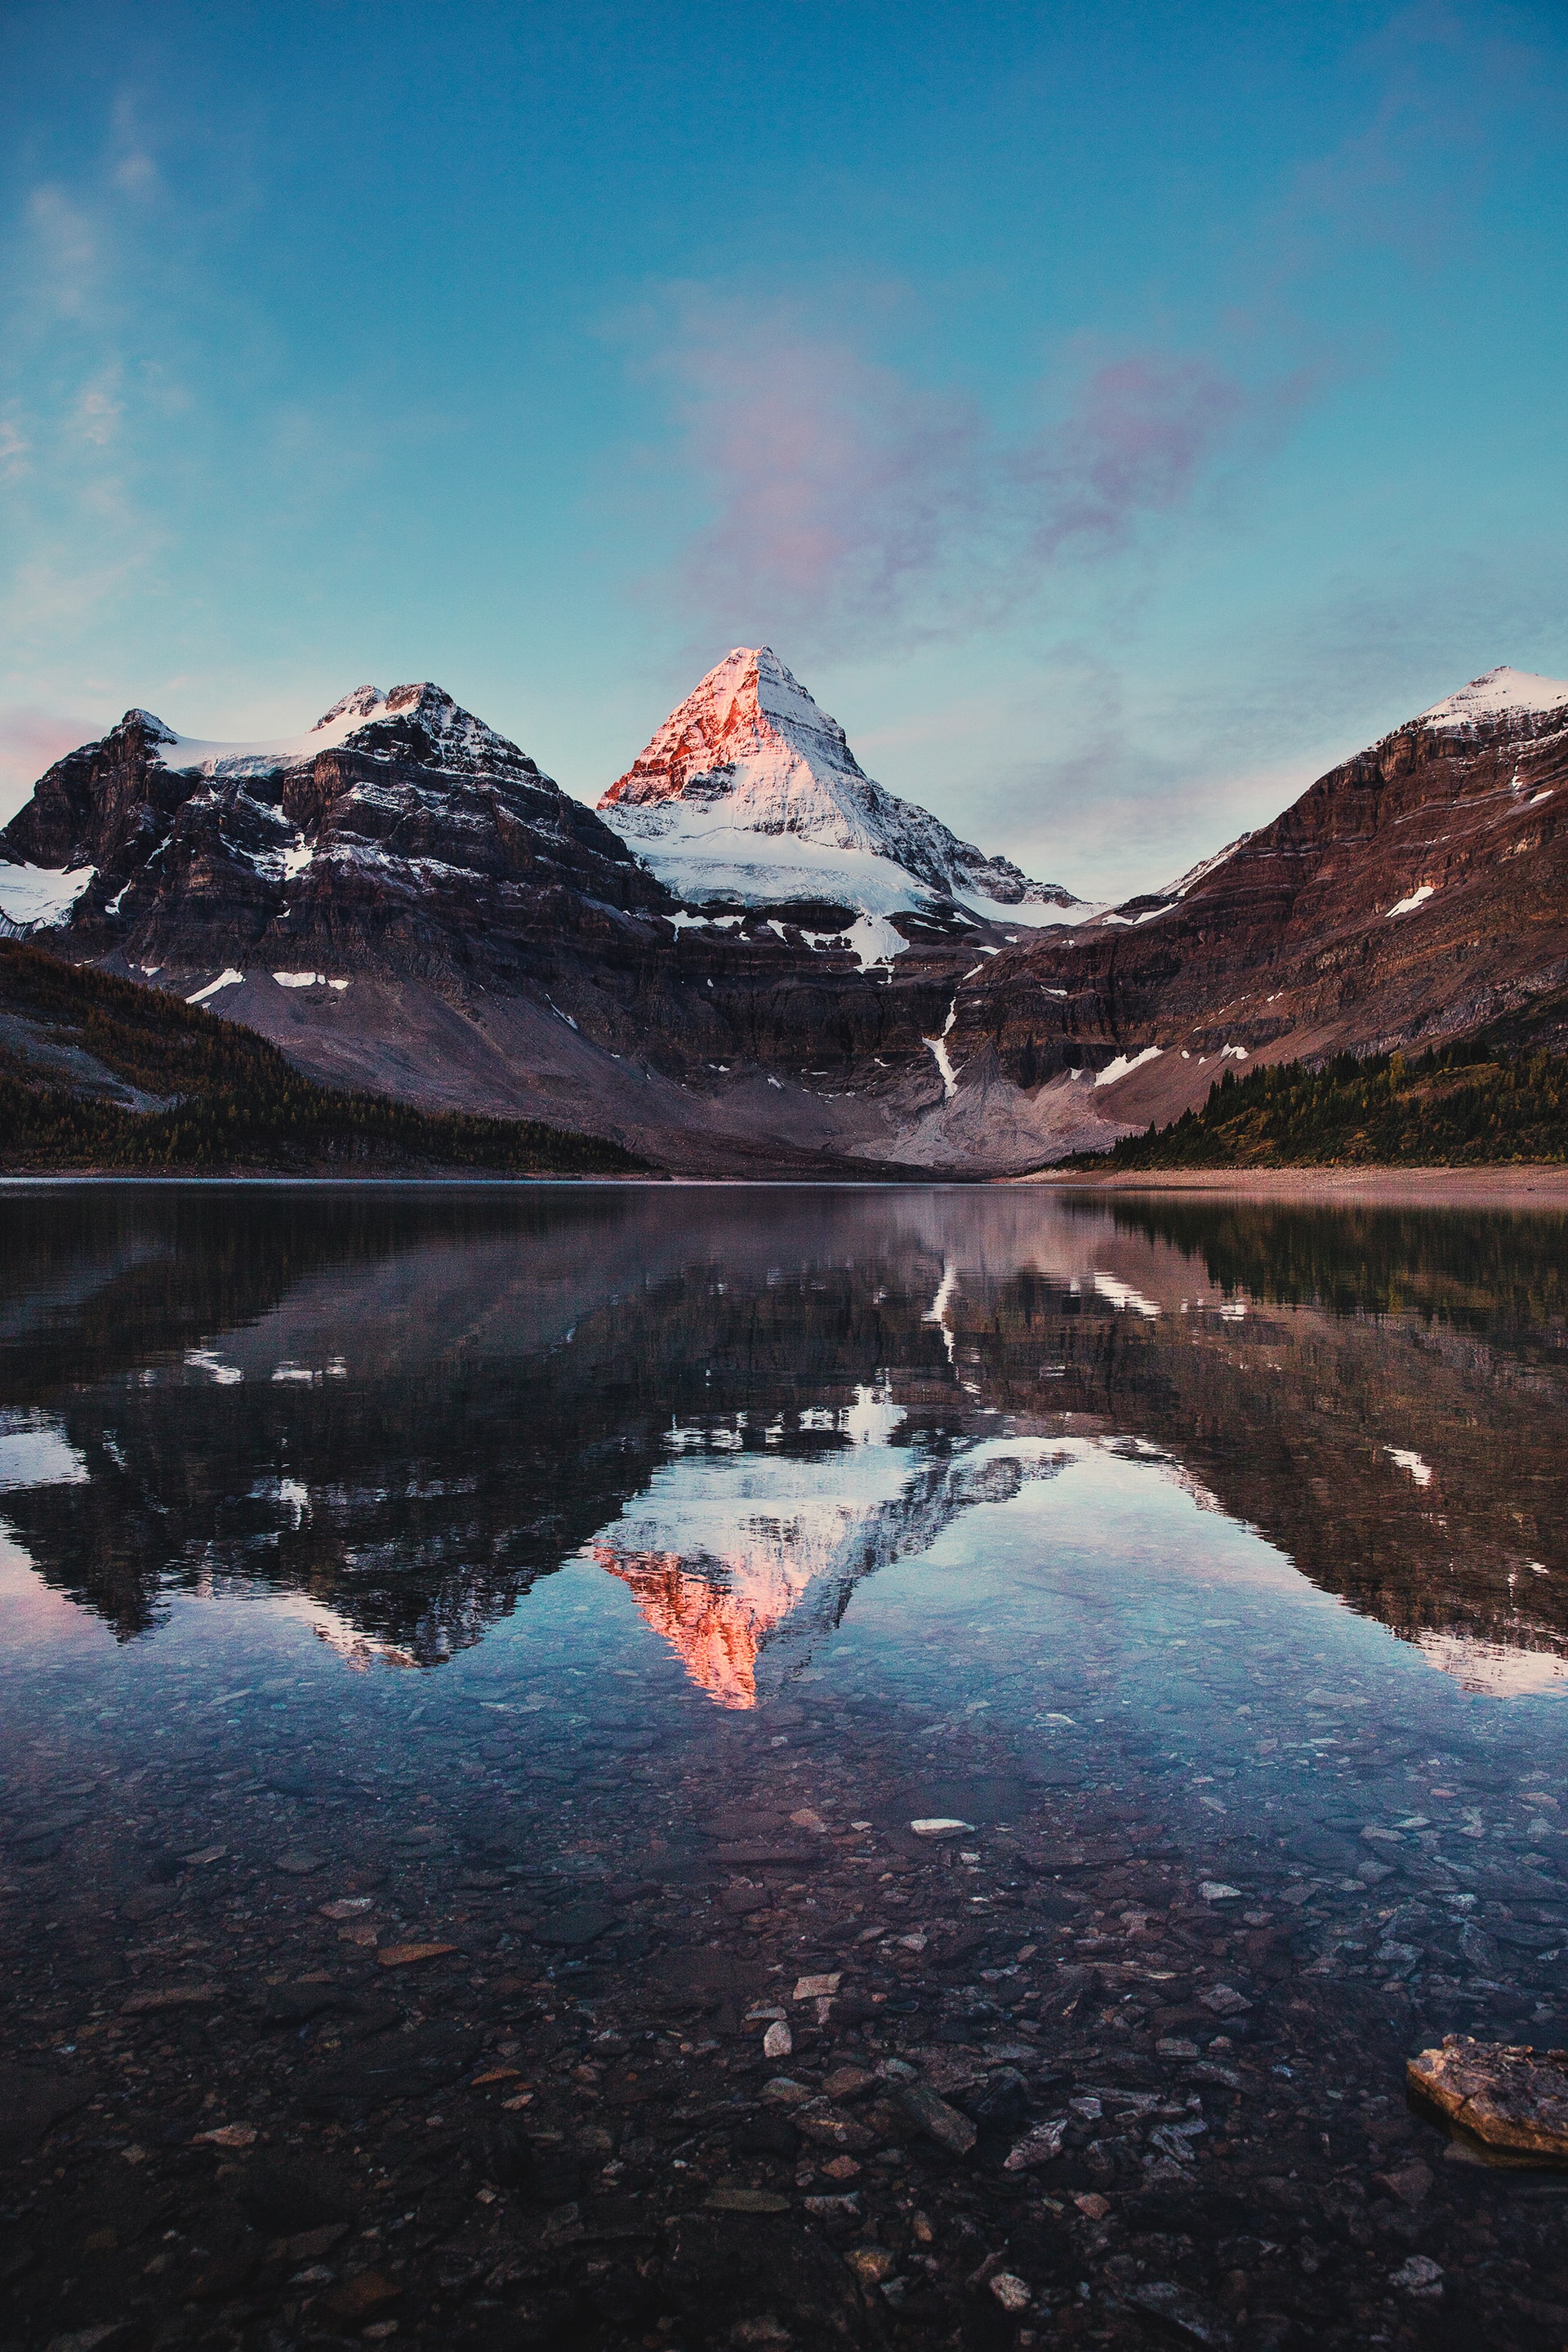 A picture of Mt Assiniboine in British Columbia